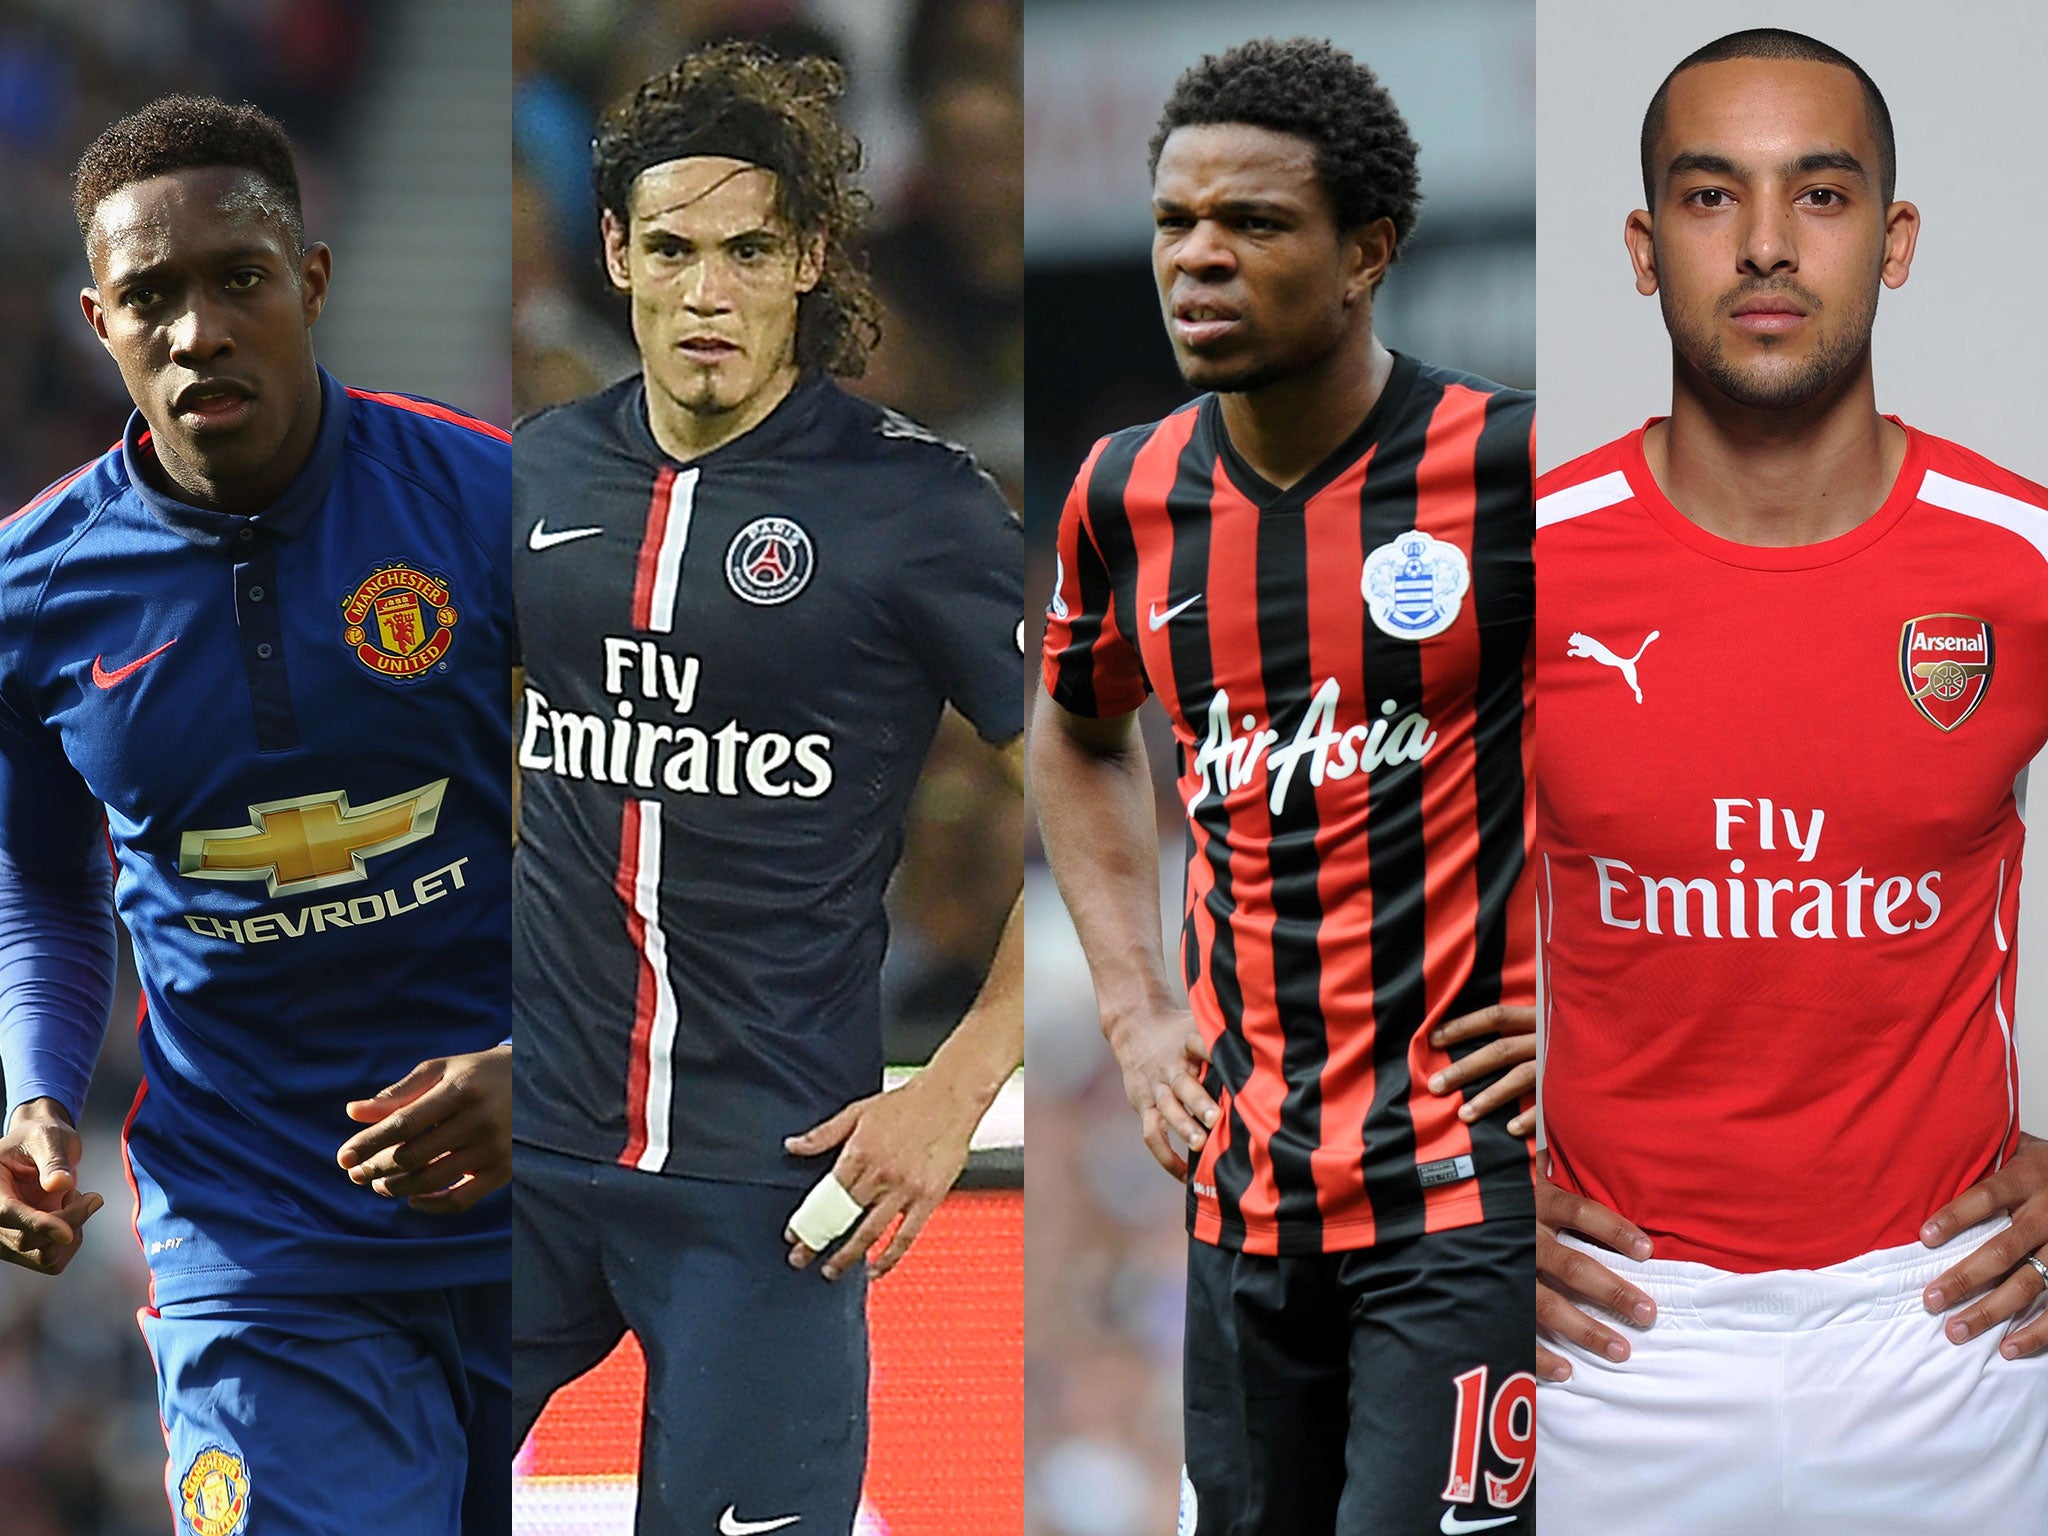 Could Arsene Wenger turn to Danny Welbeck, Edinson Cavani or Loic Remy to replace Olivier Giroud?